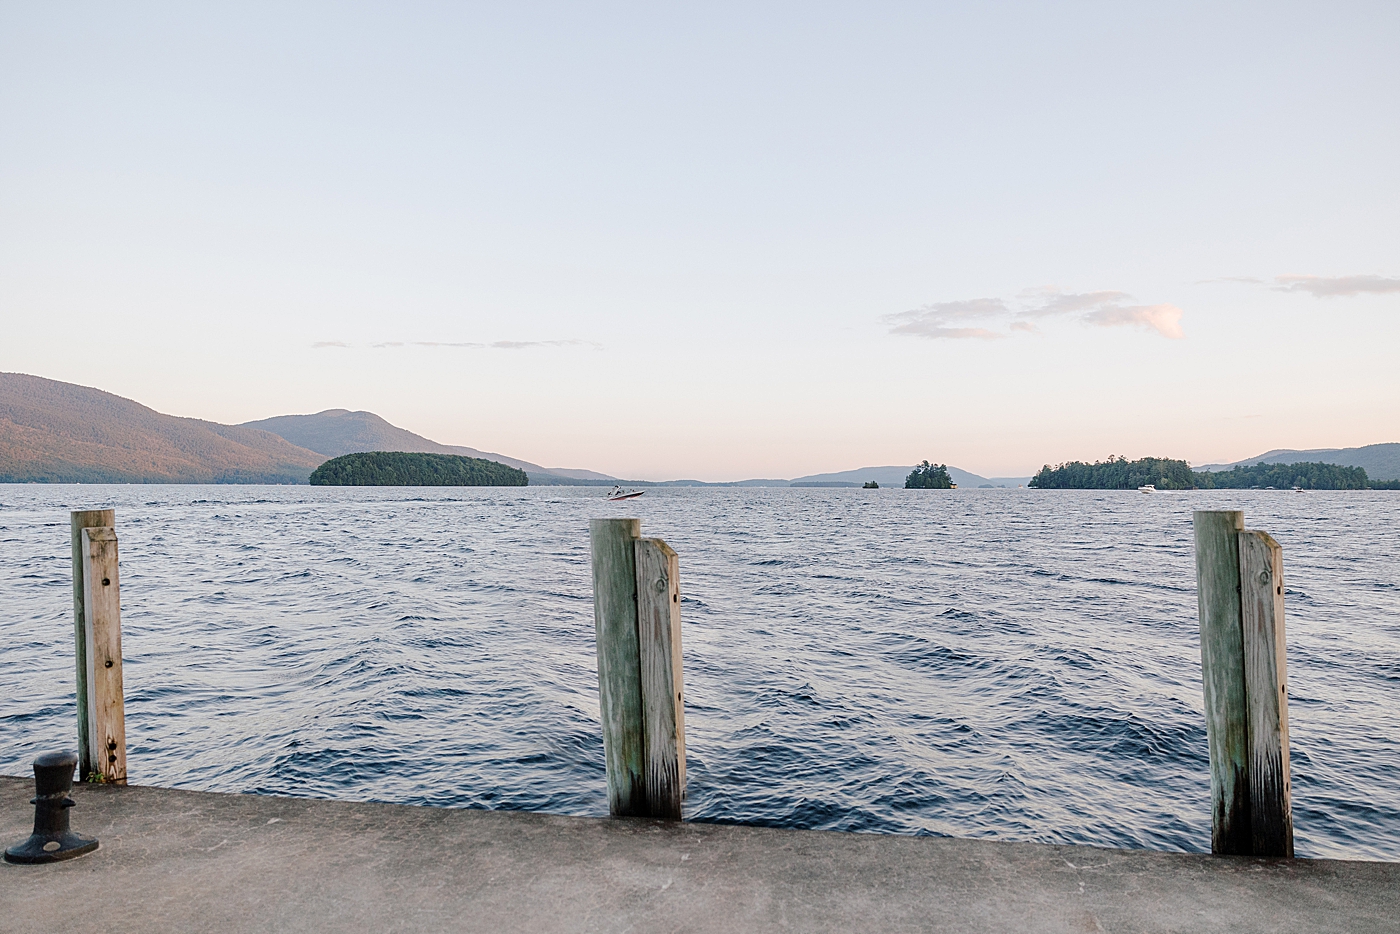 Location image of a dock in the harbor and water at sunset | Image by Hope Helmuth Photography